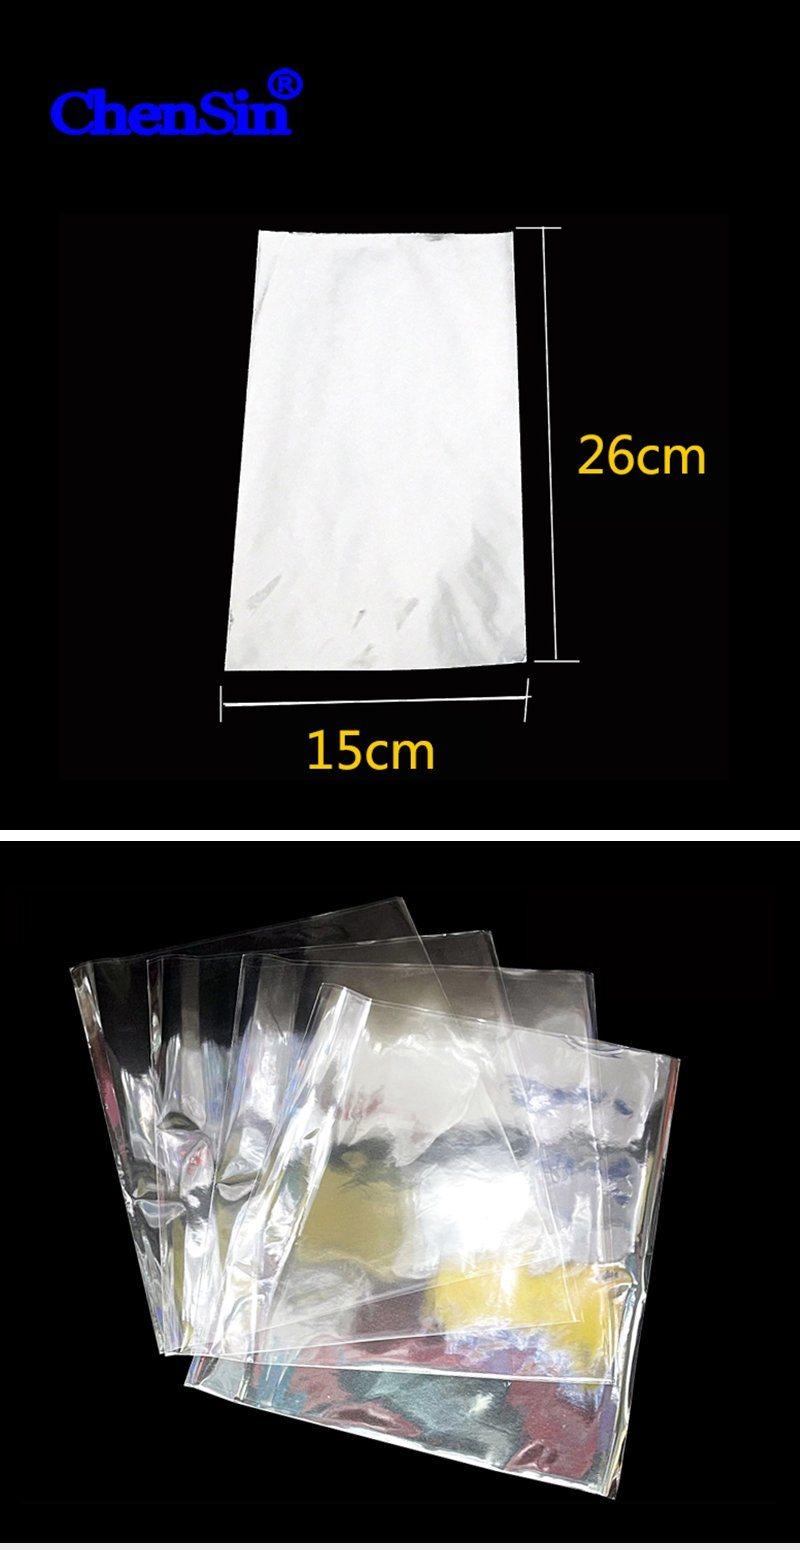 Flat Pocket Clear OPP Flat Packaging Bags for Case Box